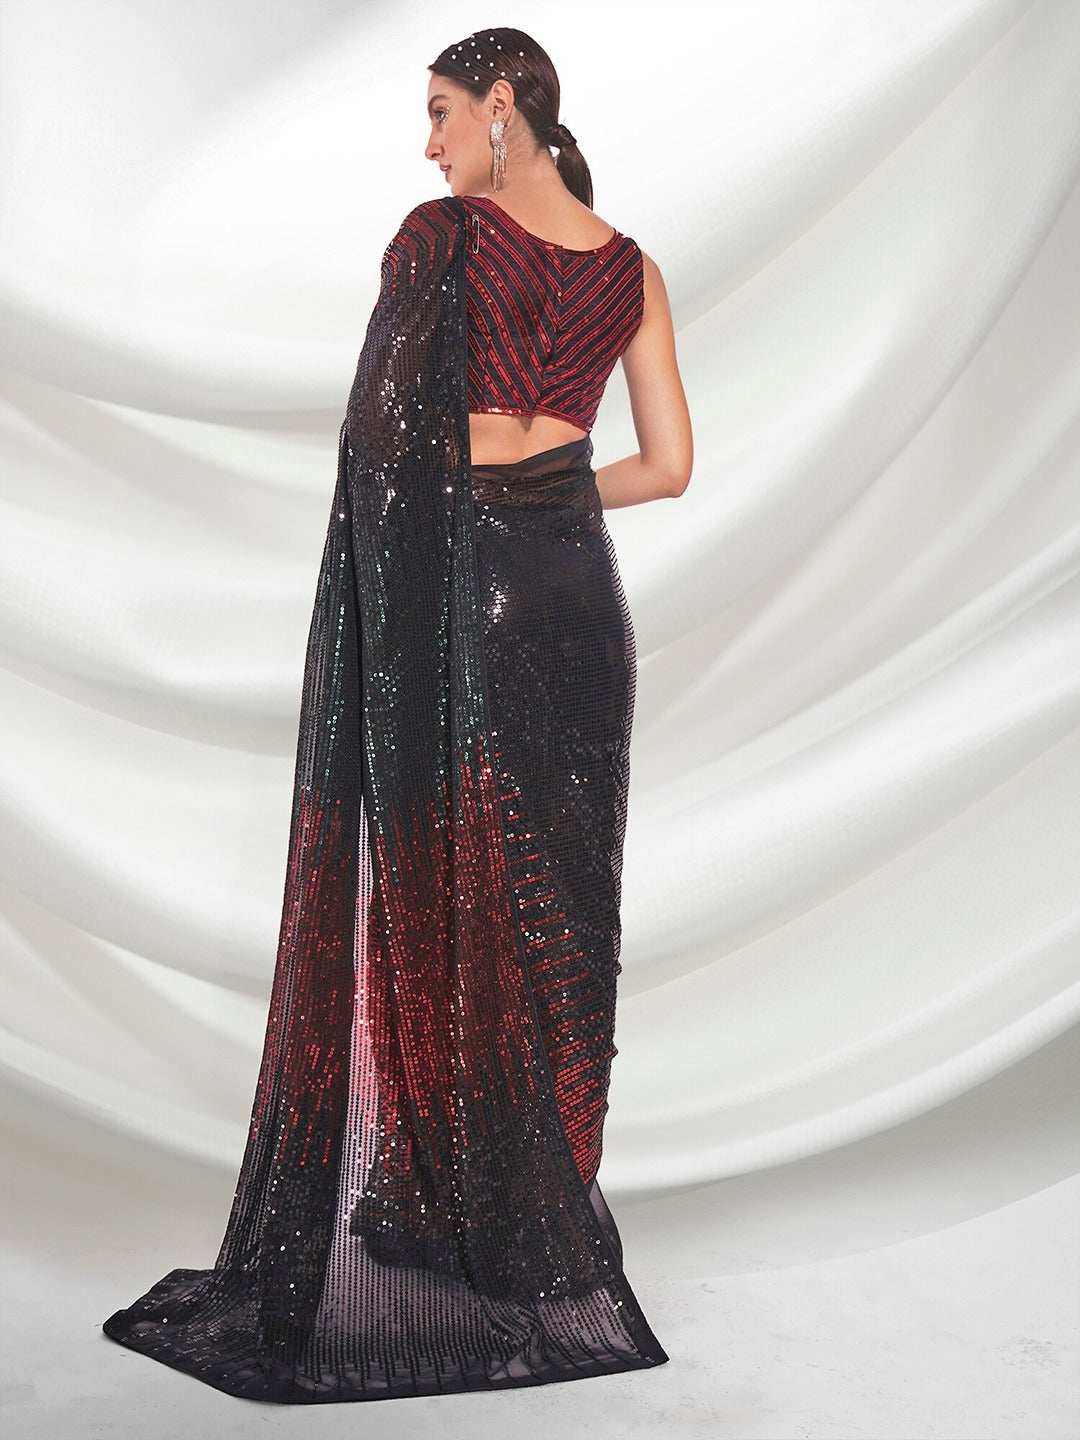 Beautiful Black & Red Sequence embroidery work in double run thread With backpach and piping Saree For Women